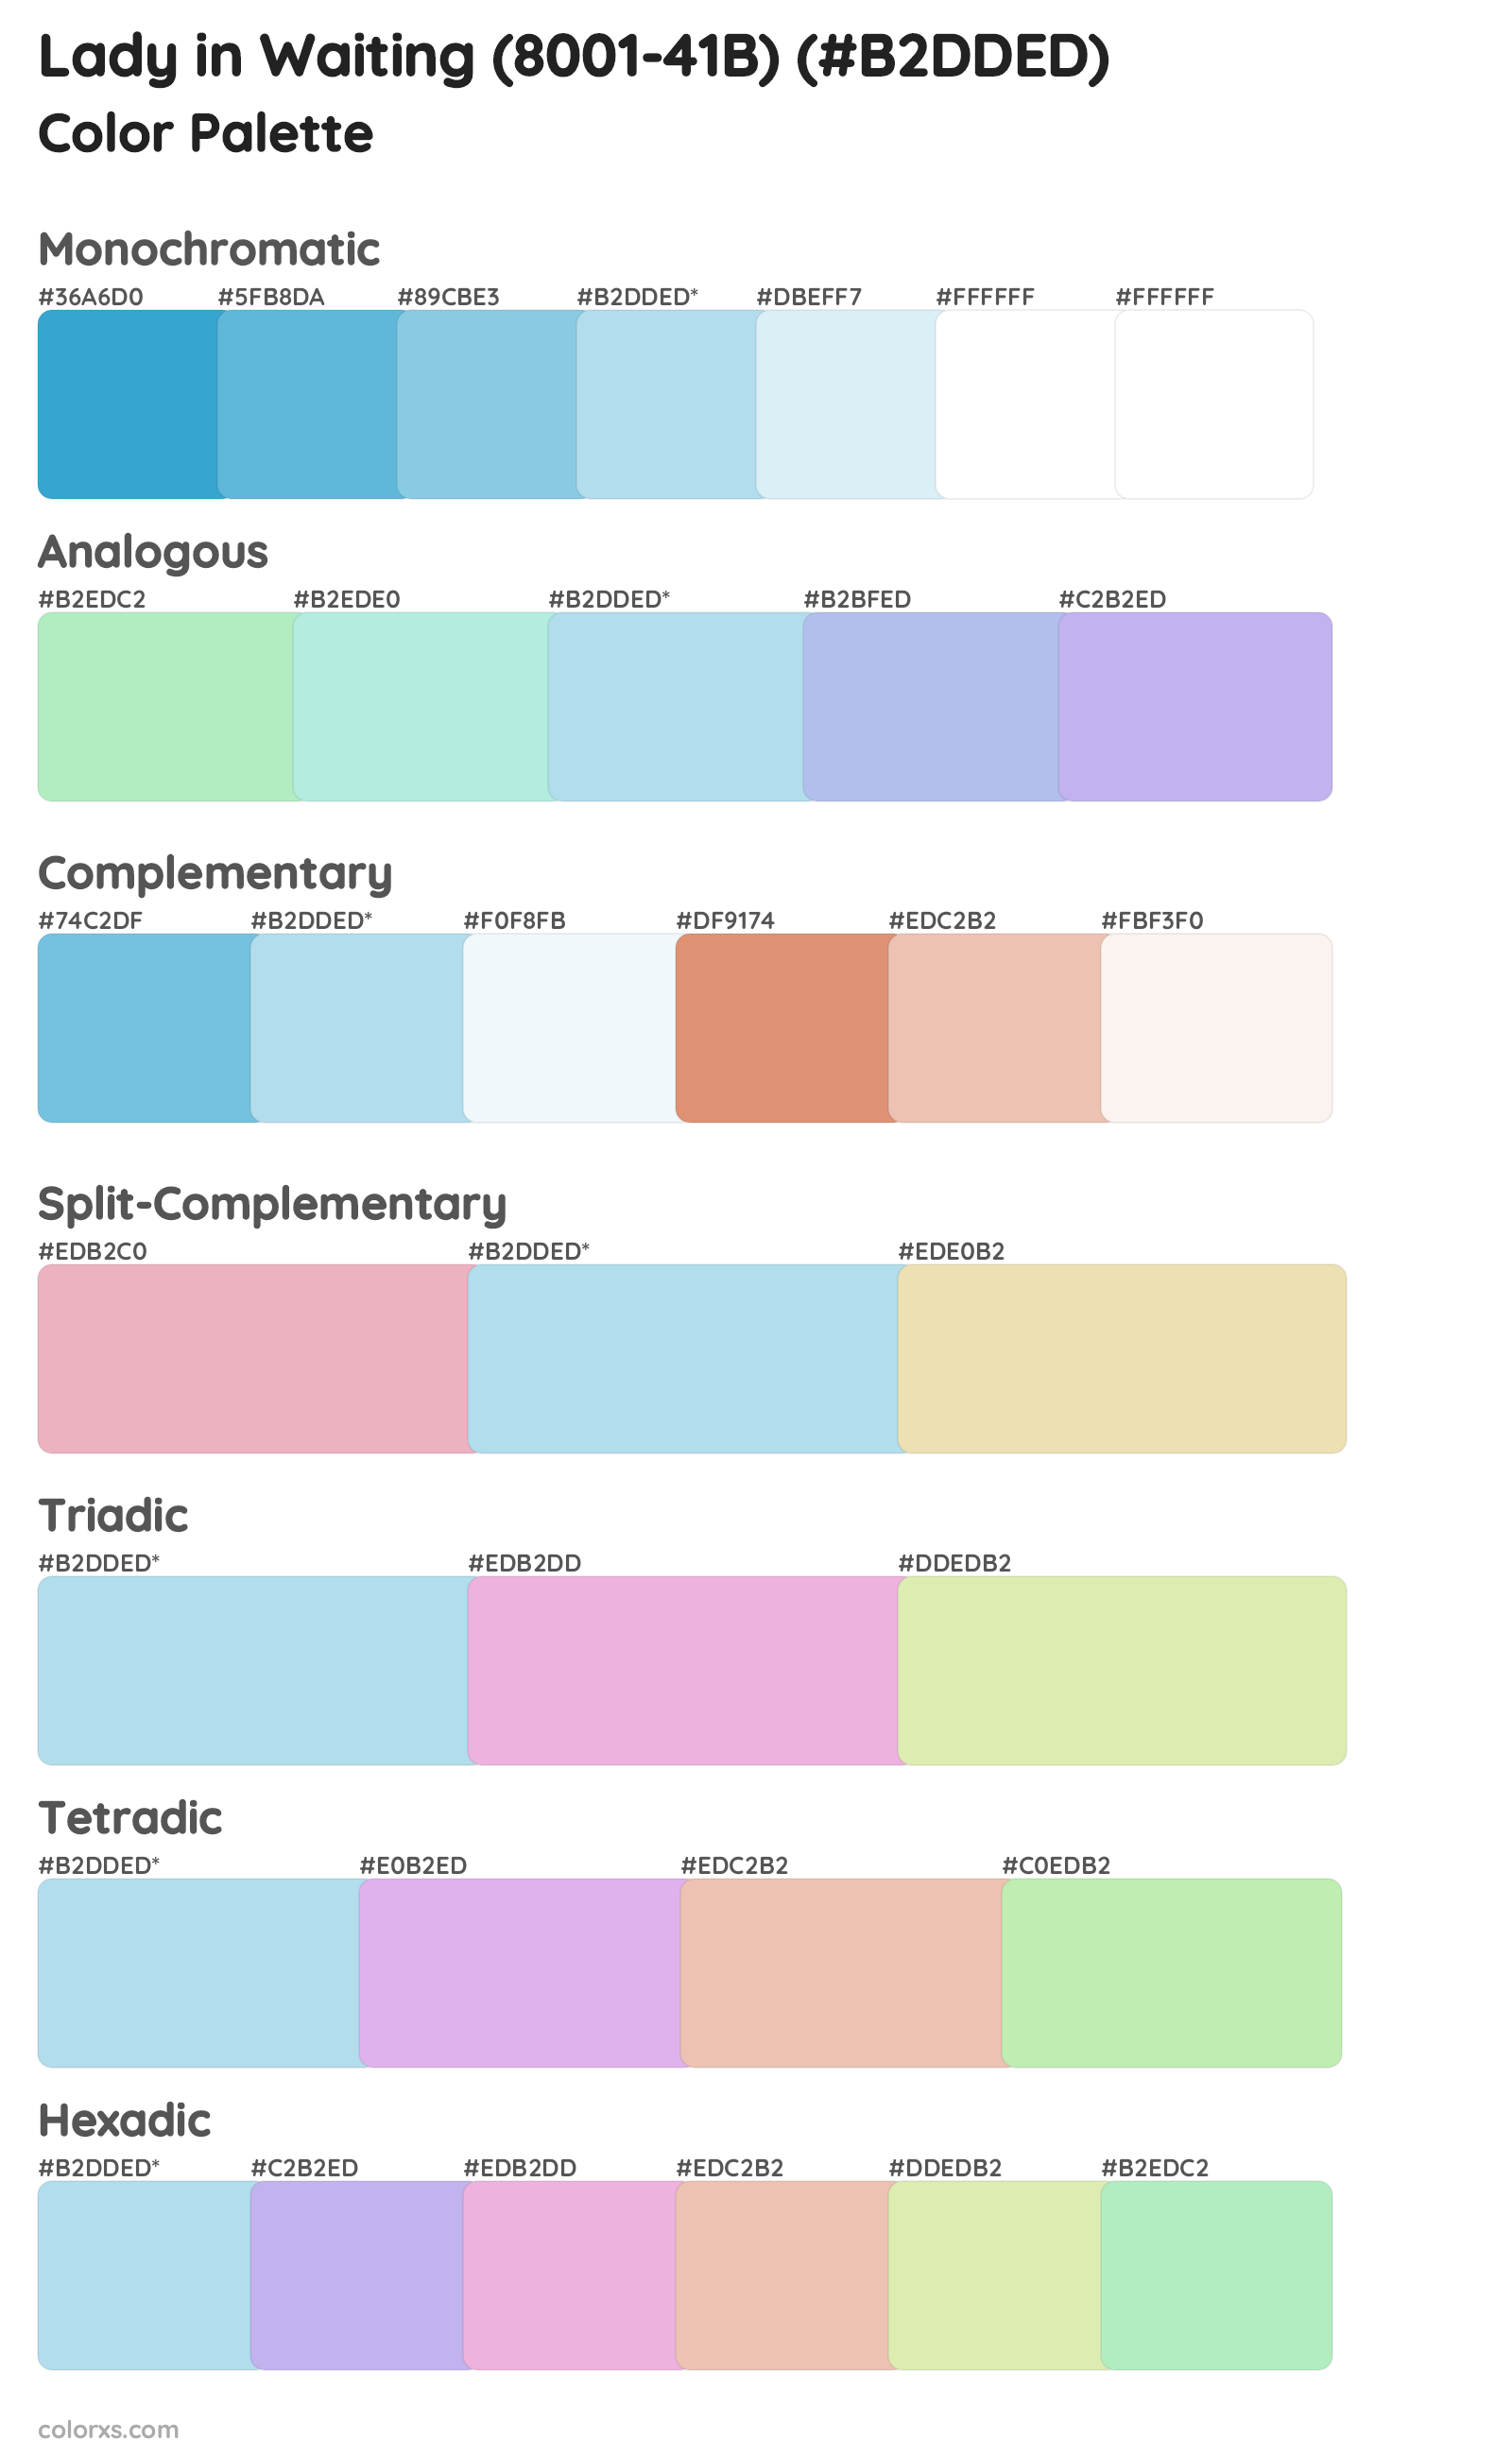 Lady in Waiting (8001-41B) Color Scheme Palettes